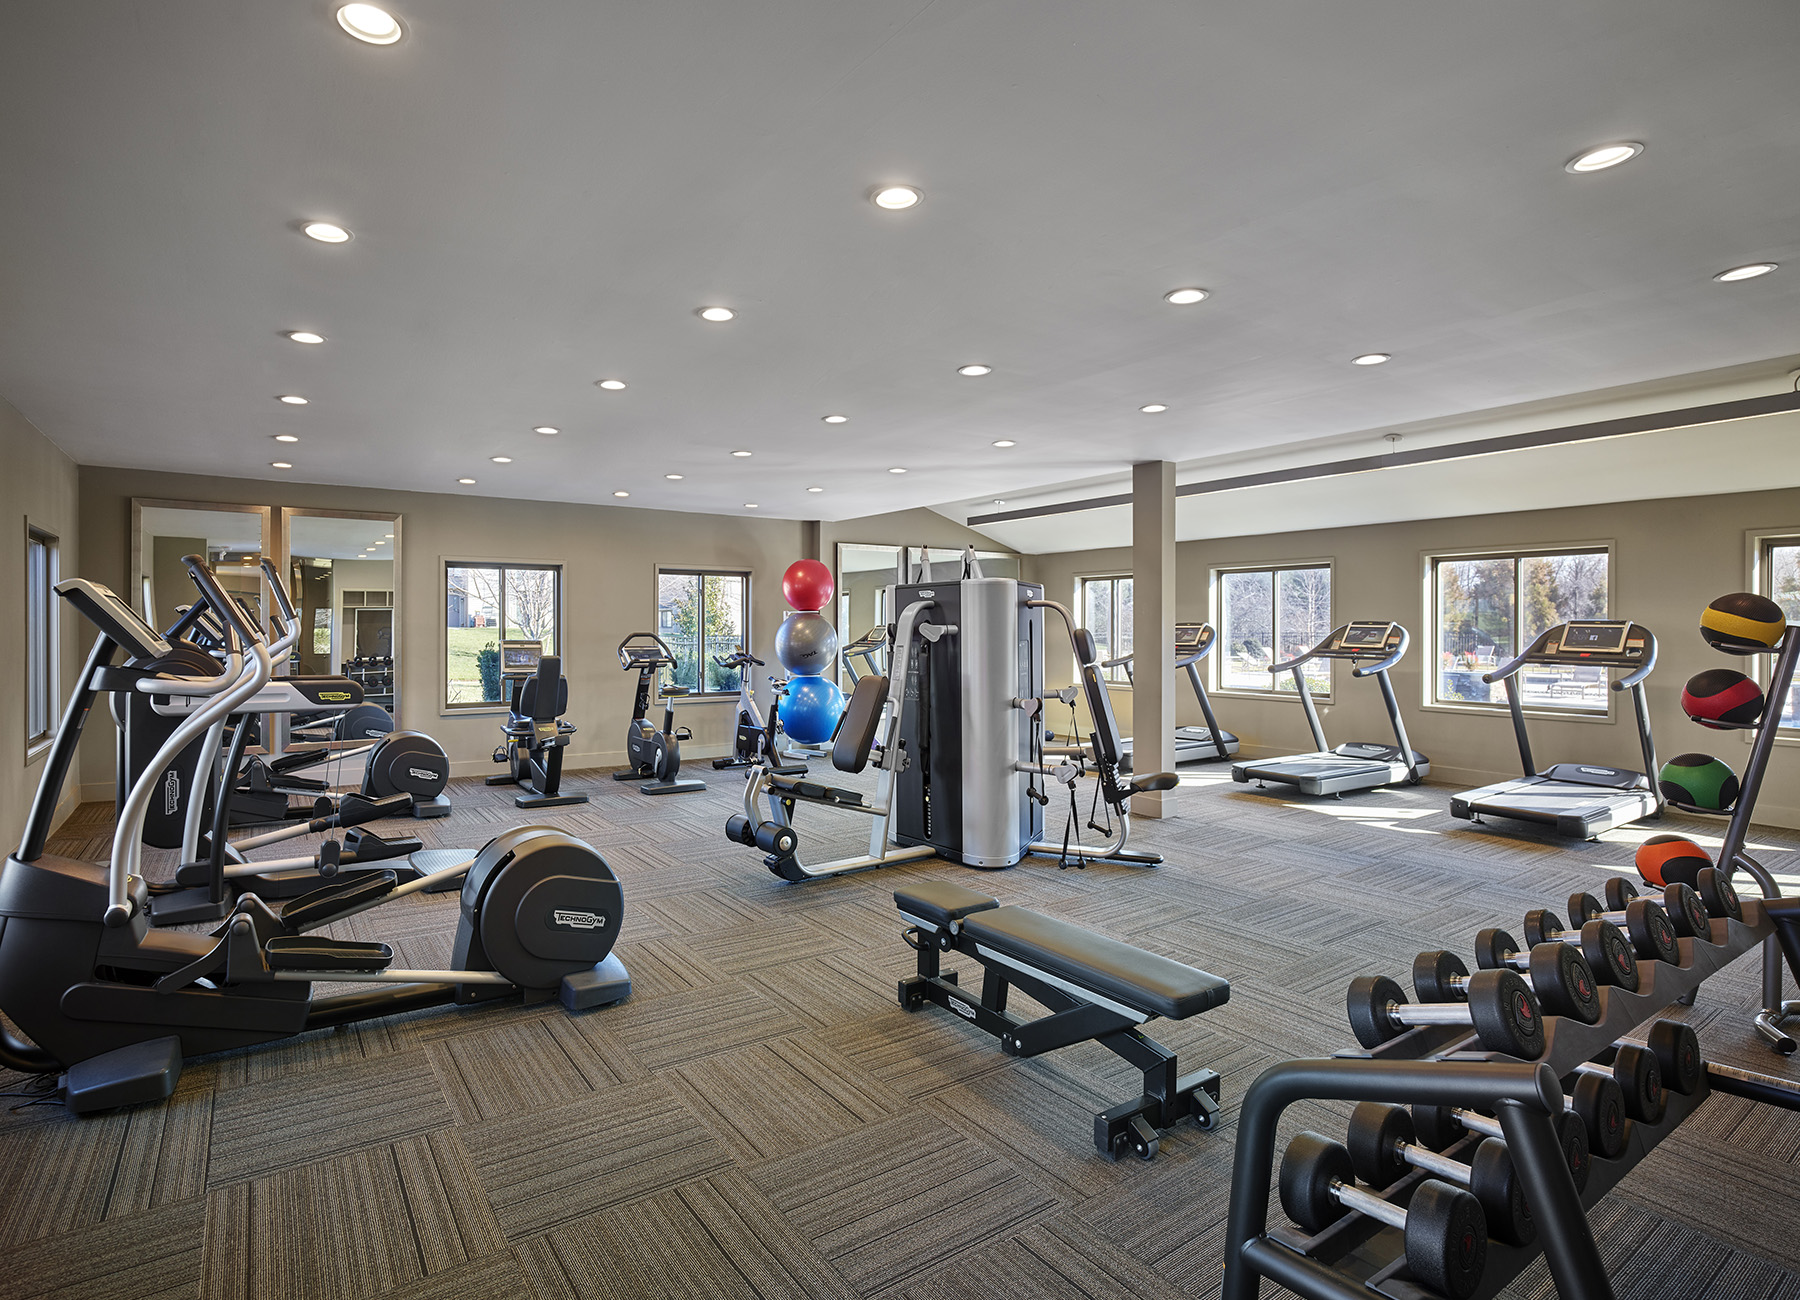 Modern fitness facility with carpet, machines, free weights, and yoga balls